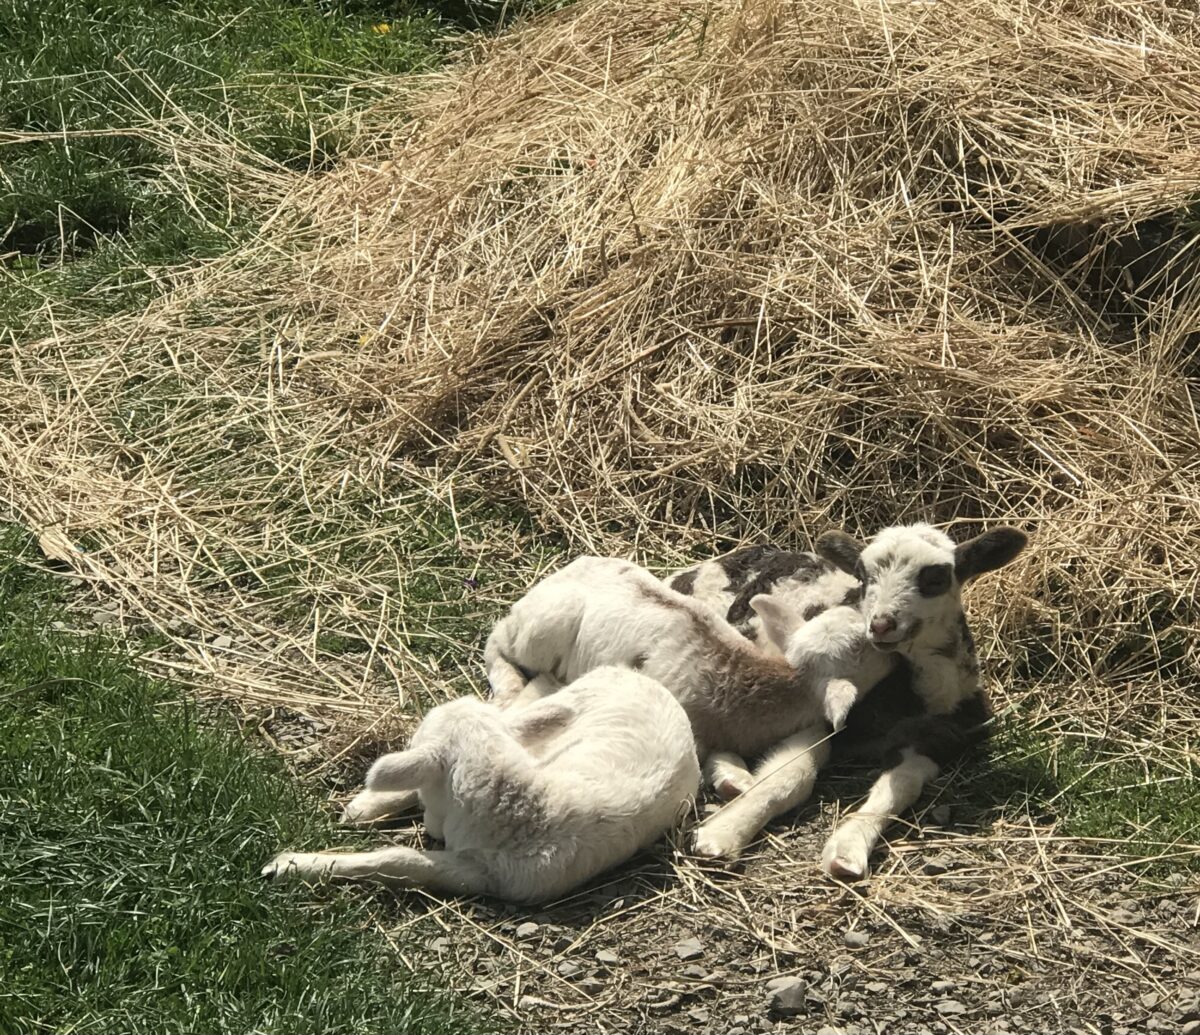 Lambs at Evermore Farms